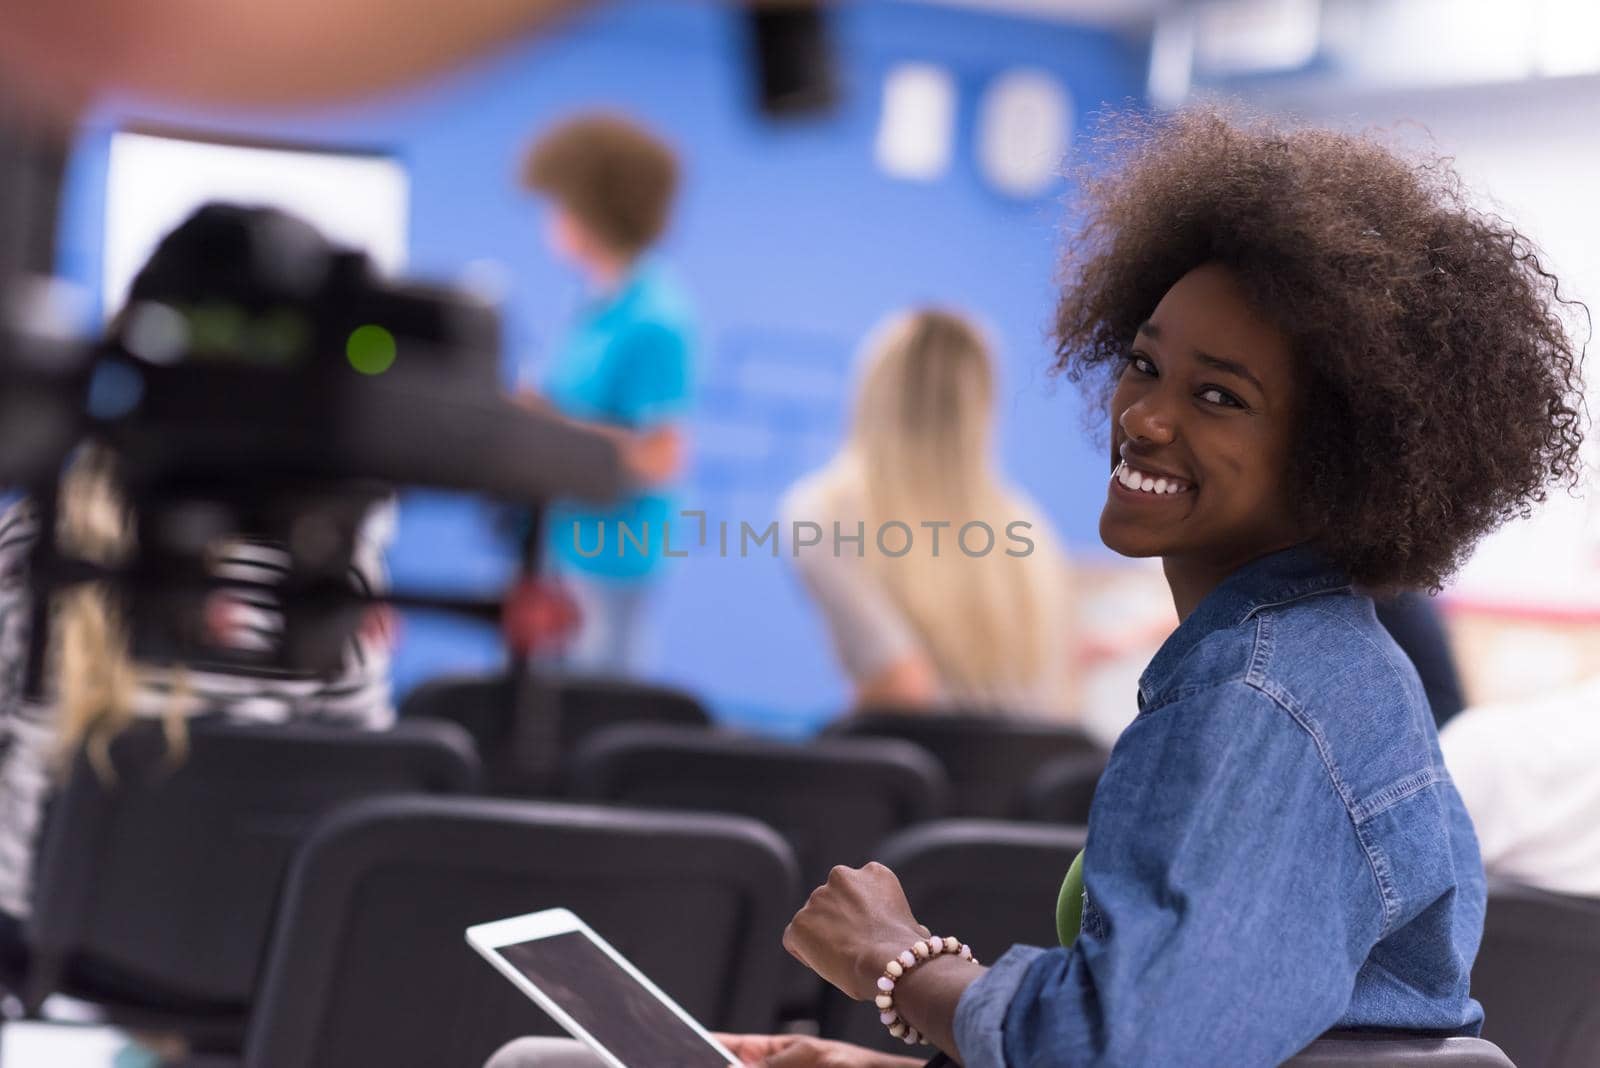 portrait of young African American business woman at modern startup office interior, team in meeting in background